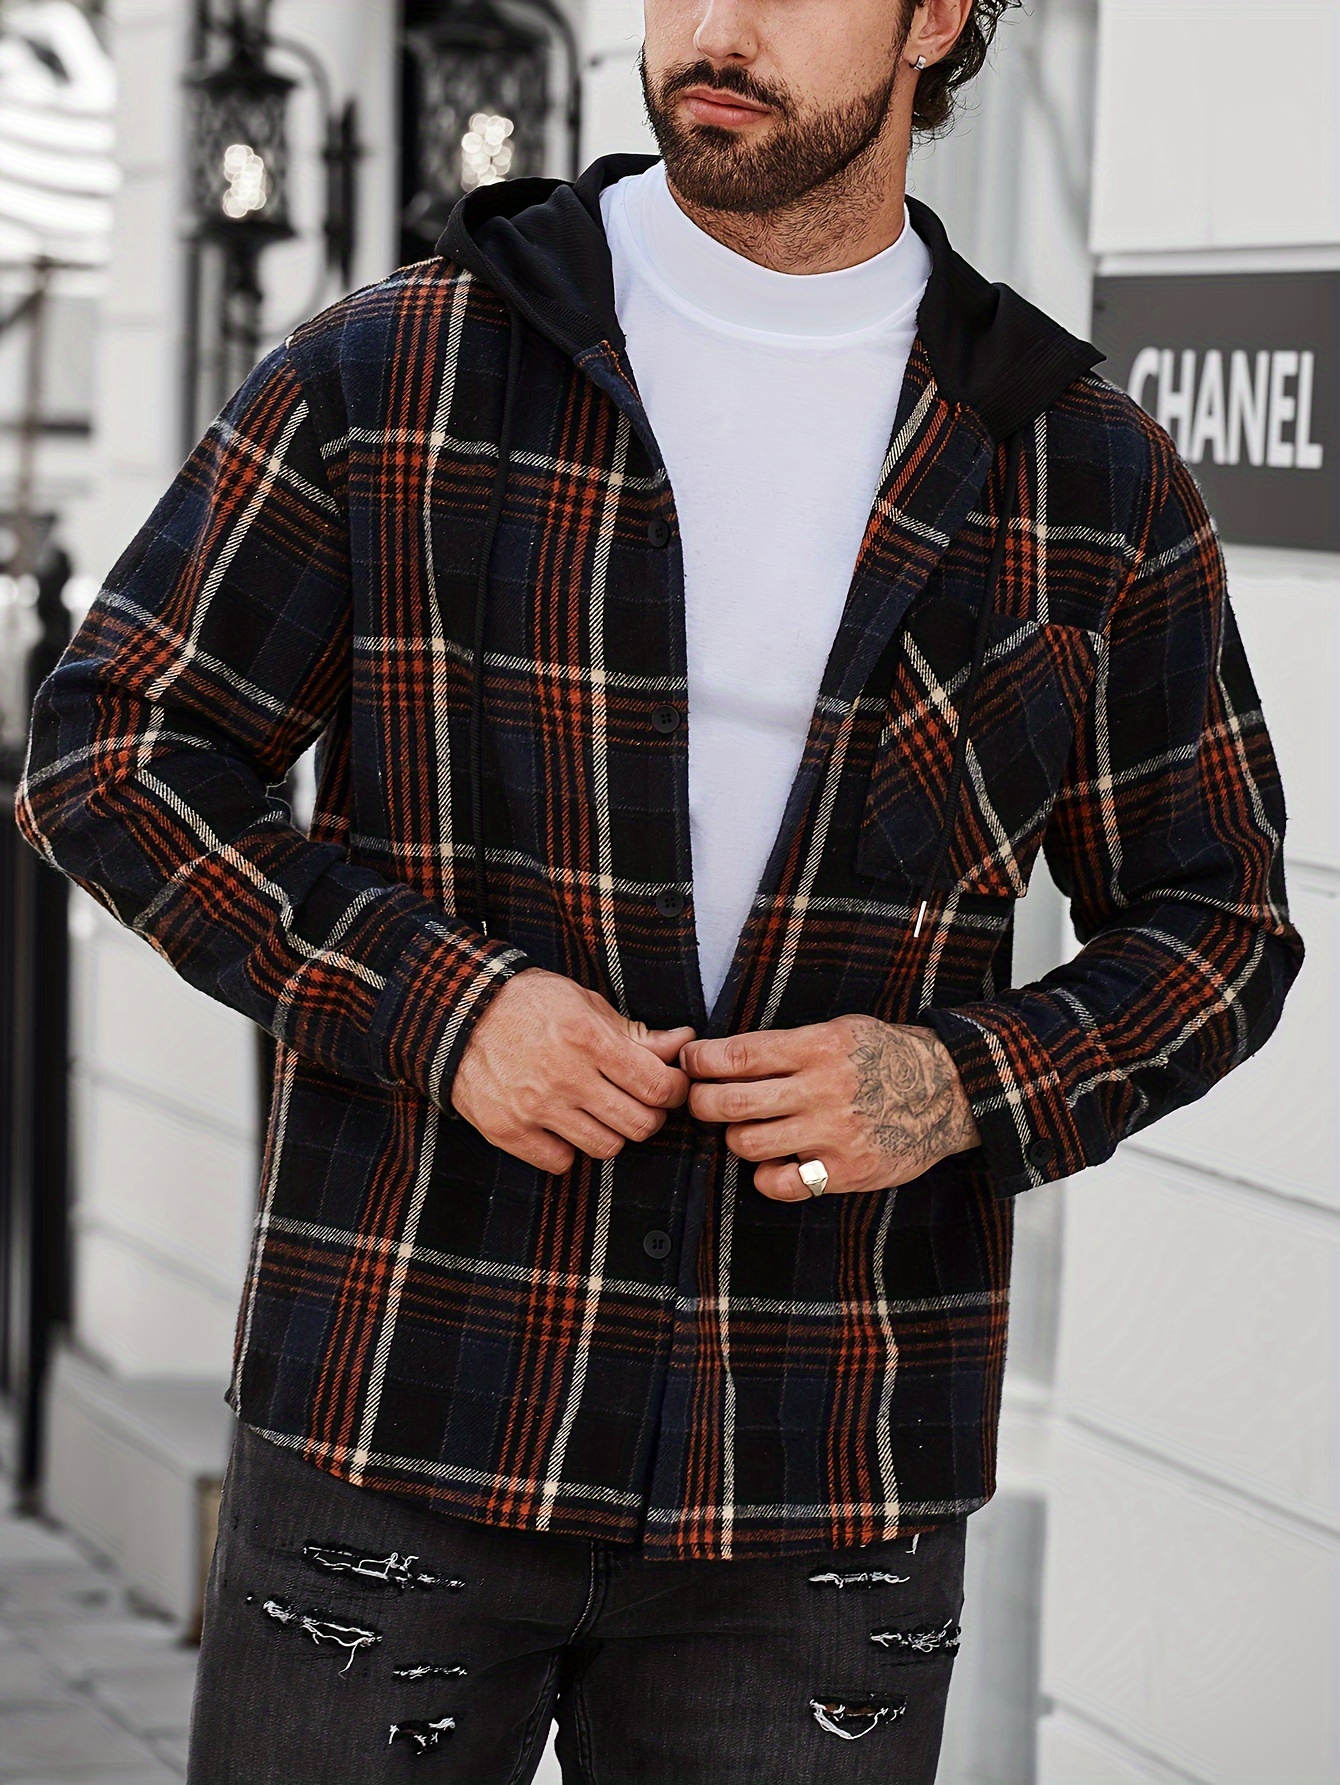 Casual Plaid Pattern Men's Long Sleeve Hooded Shirt Jacket, Men's Button Up  Outwear For Fall Winter Outdoor